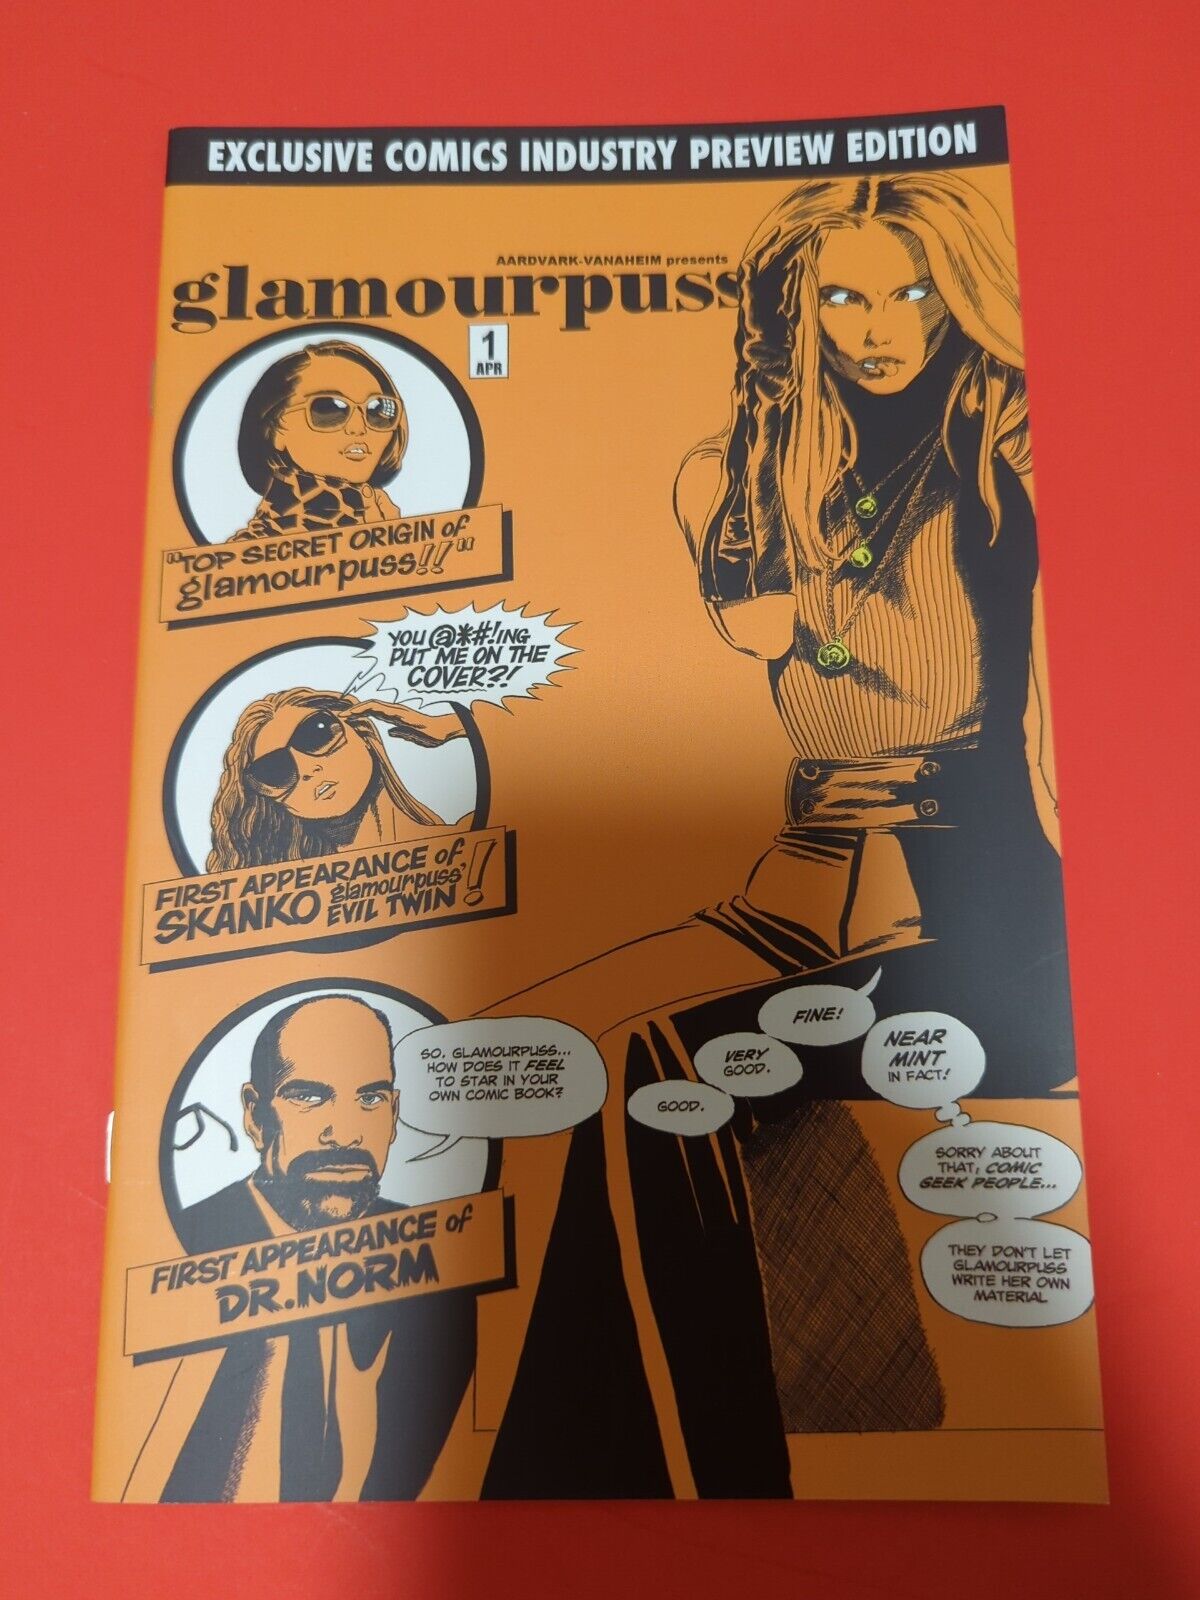 Glamourpuss no. 1 -2008 Exclusive Comics Industry Preview Edition HIGH GRAD (B1)